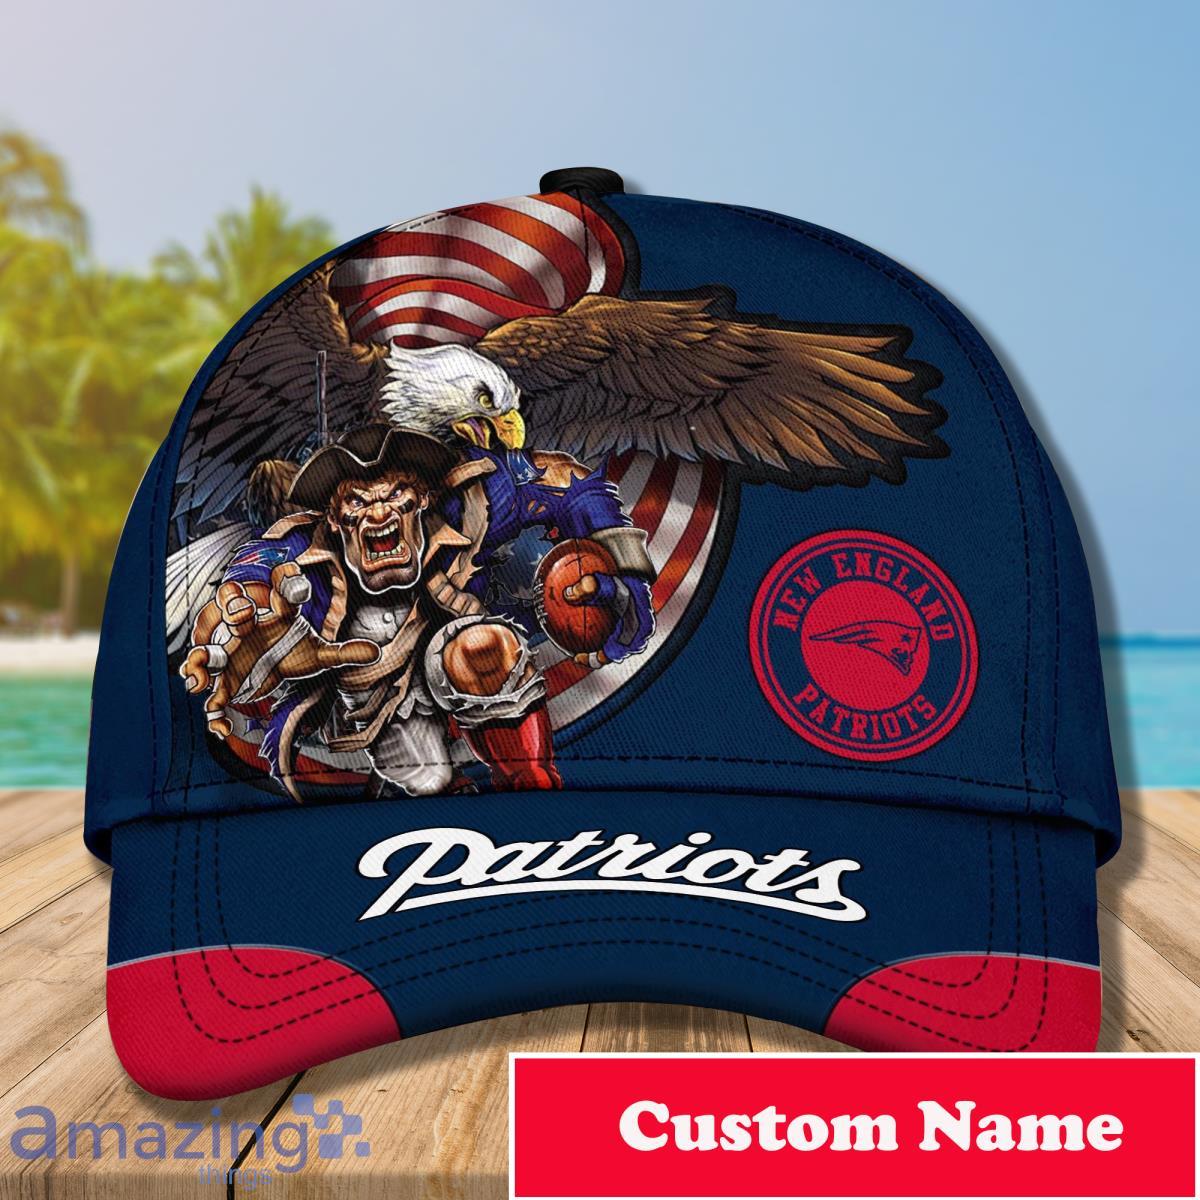 New England Patriots NFL Custom Name Cap For Men And Women Style